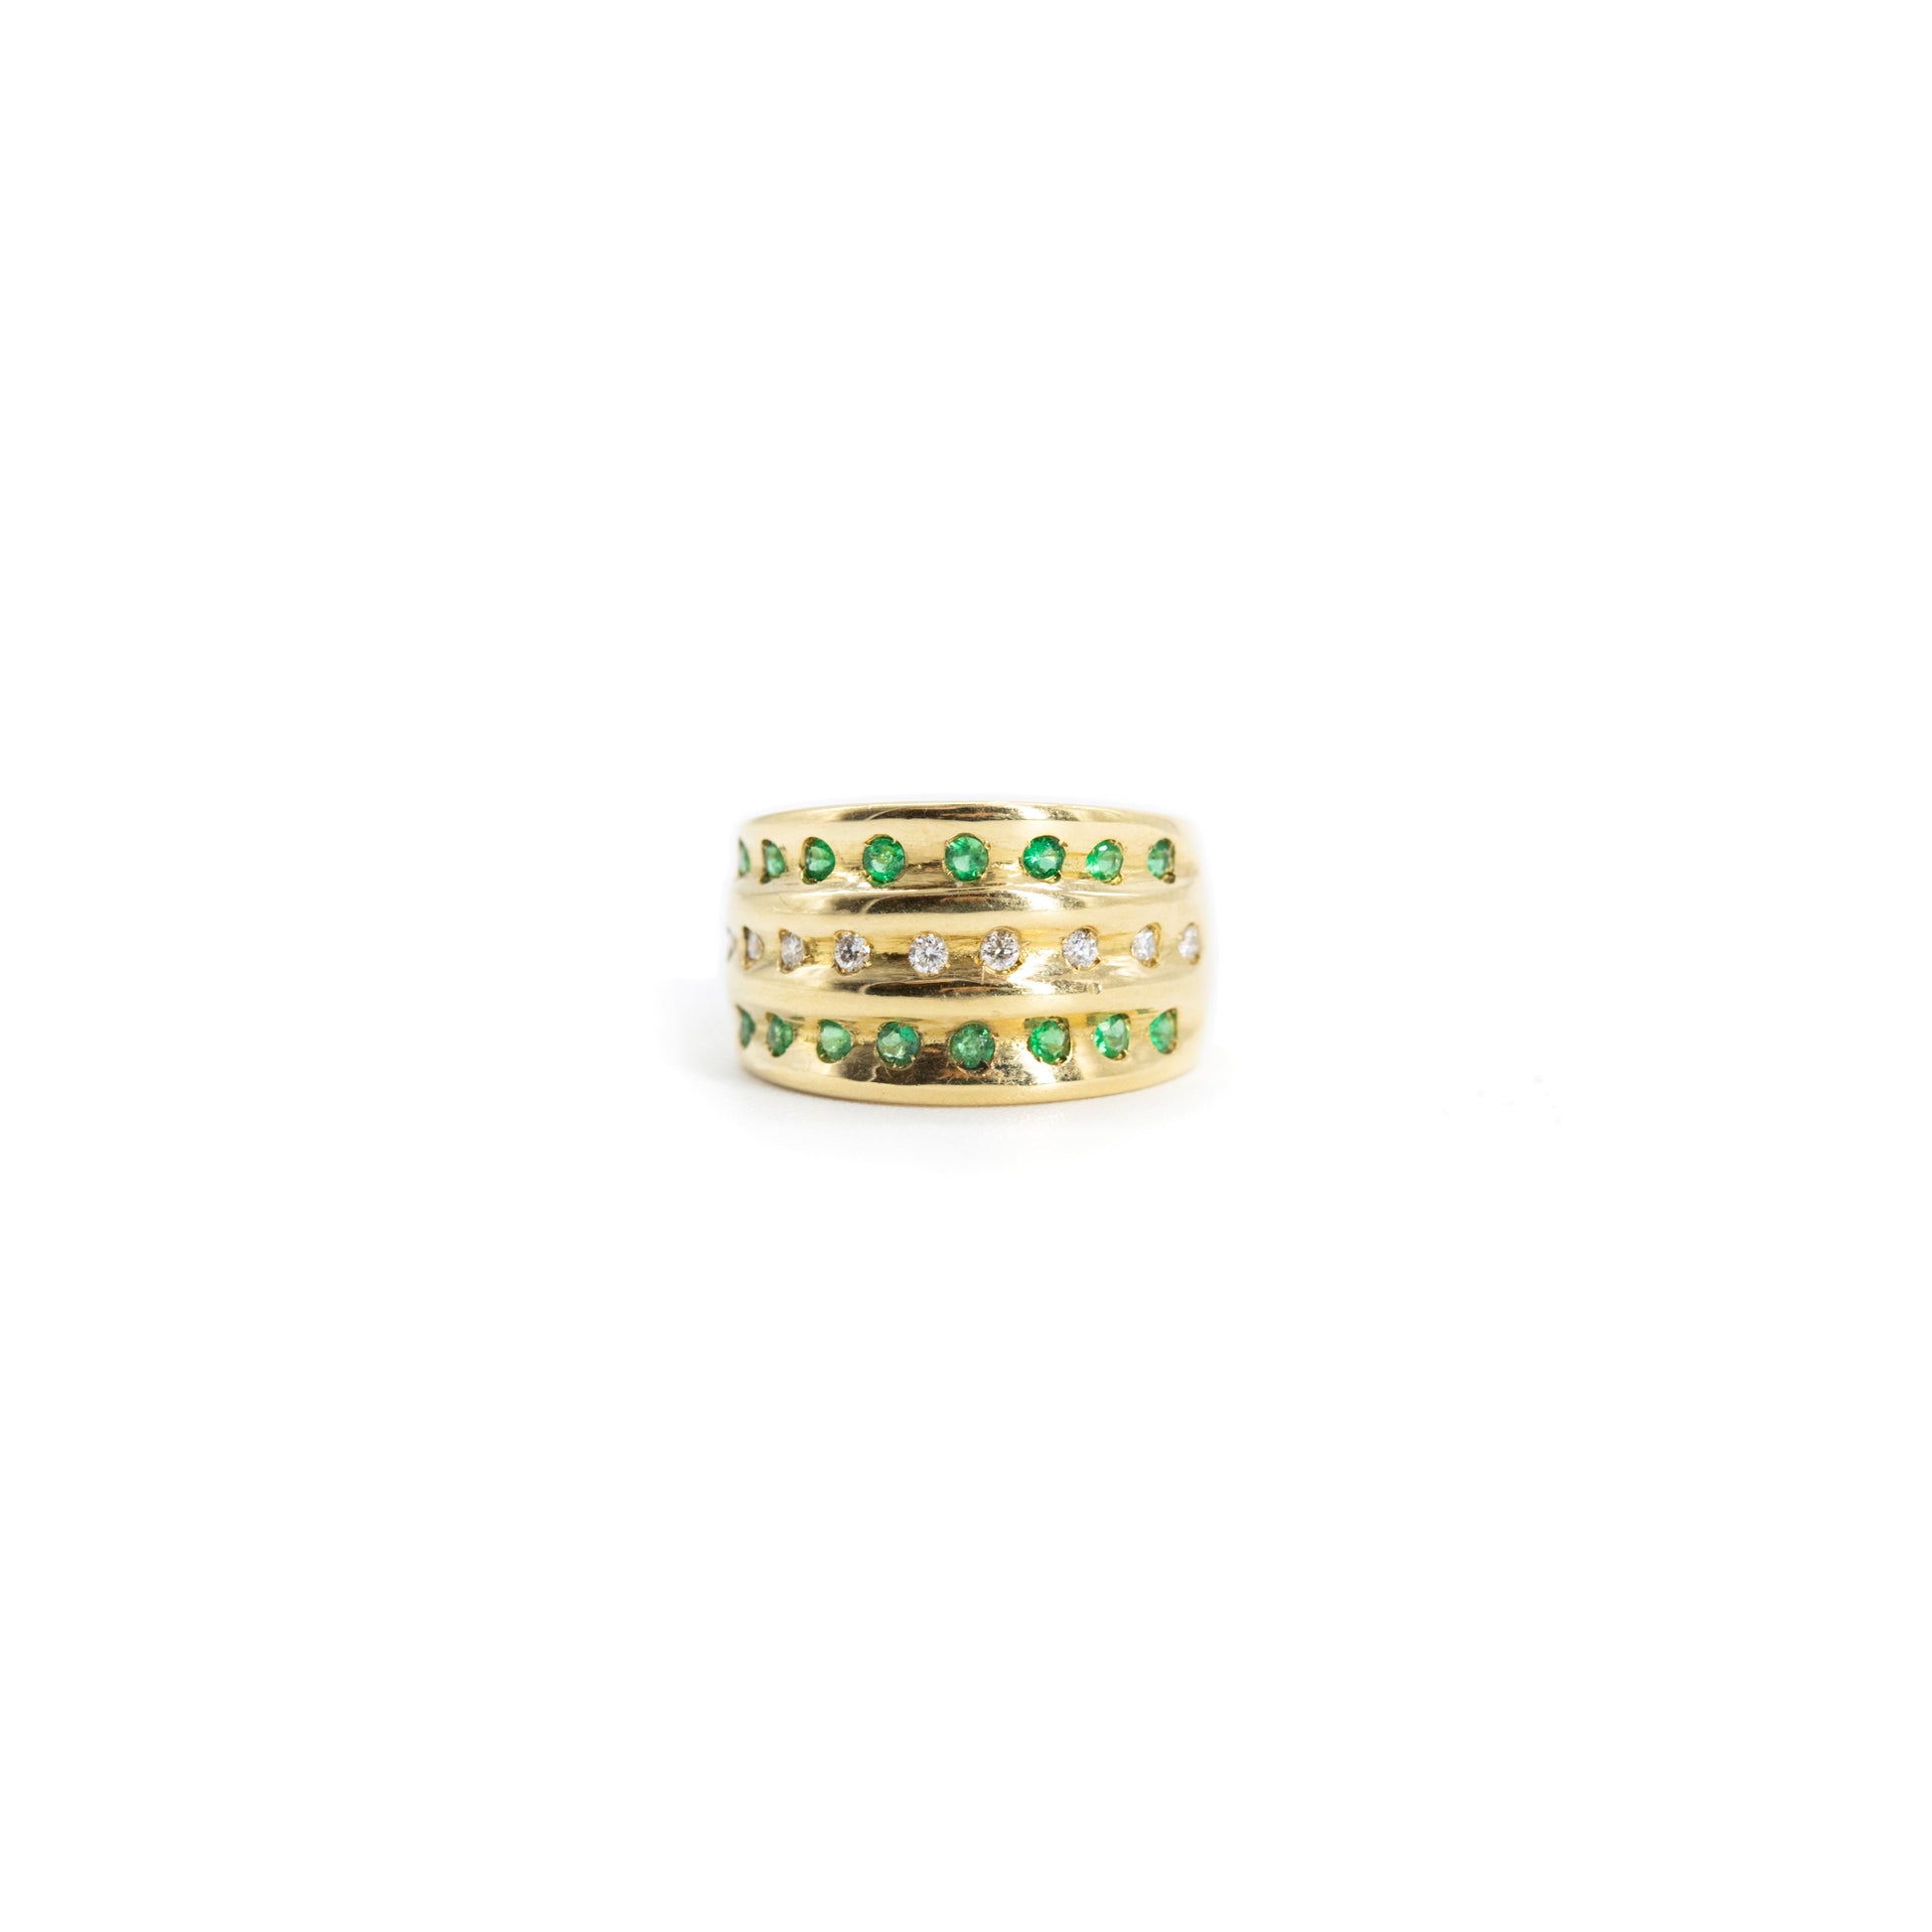 Vintage Emerald & Diamonds Ring For Women | India | Vintage jewelry | Pre-owned jewelry | Lil Milan